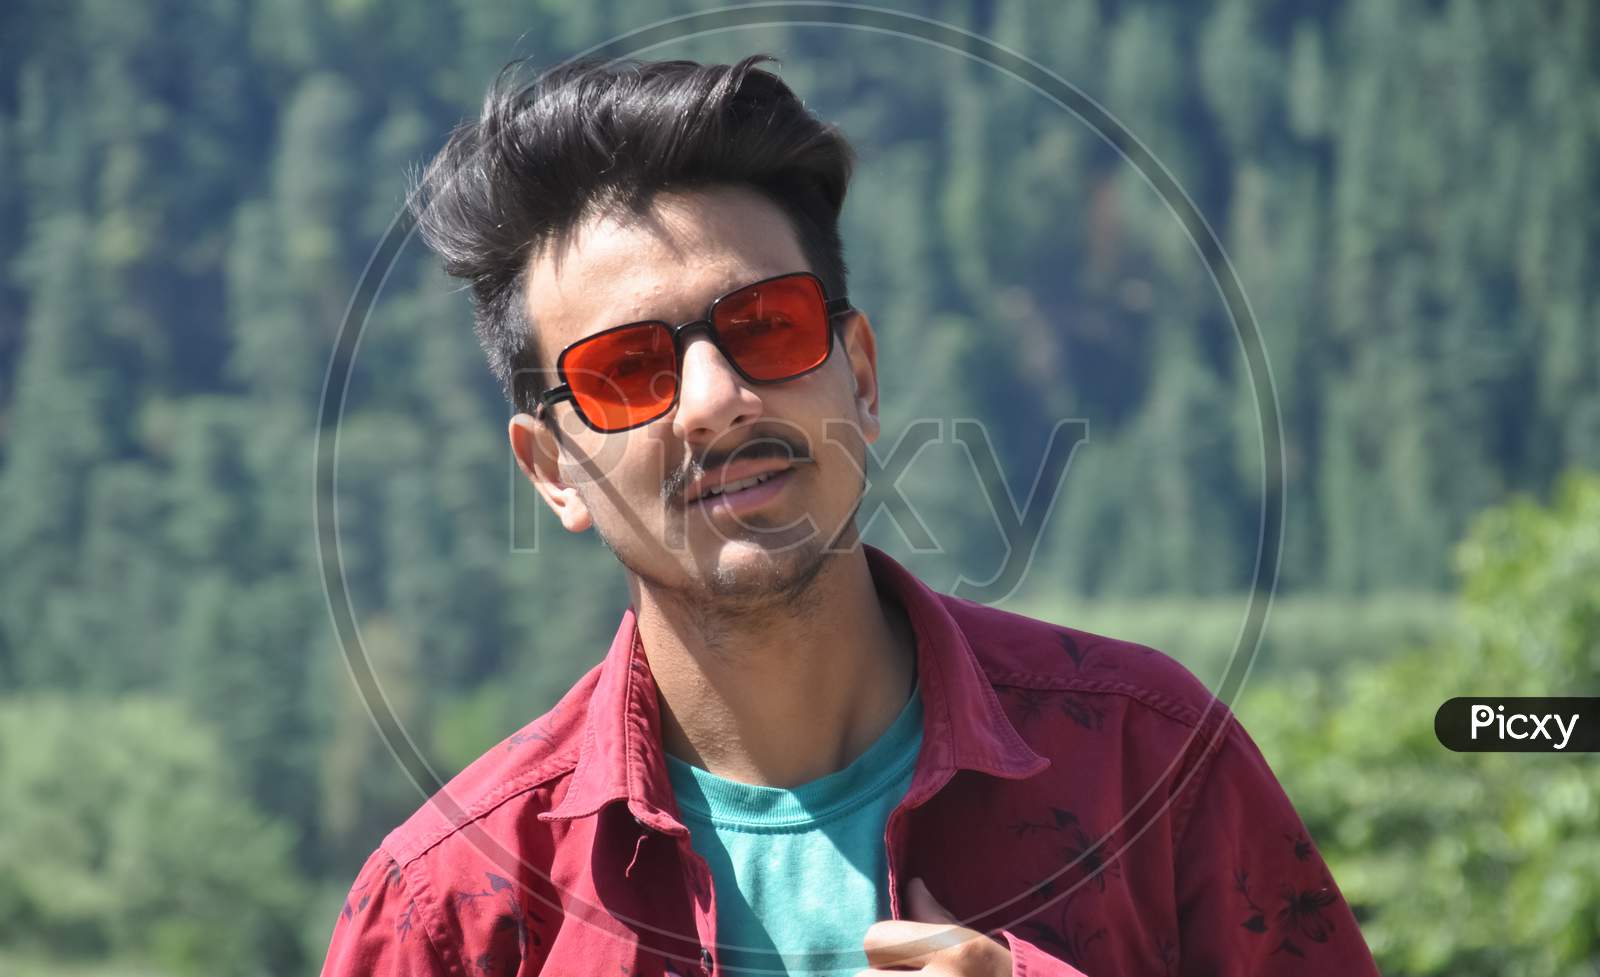 Closeup shot of a North Indian young guy posing outdoor with wearing red shirt and red sunglasses with looking at camera